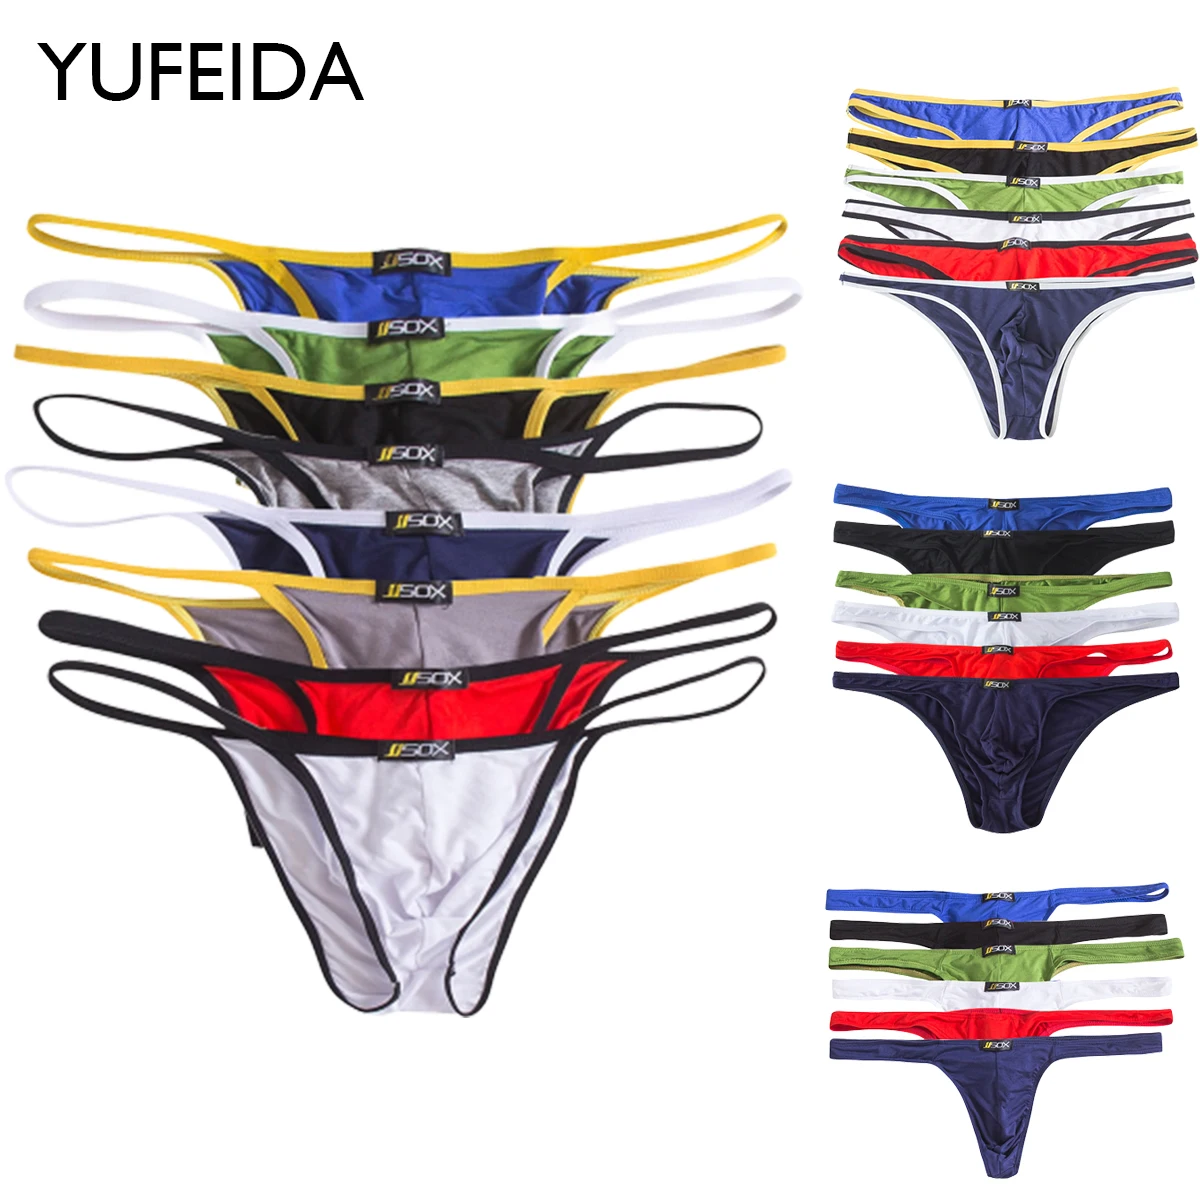 

YUFEIDA 4/6/8pcs Men's Sexy Underwear Briefs Solid Color Soft Low Waist Brief Underpant Male Gay Penis Pouch Bikini Thongs Panty